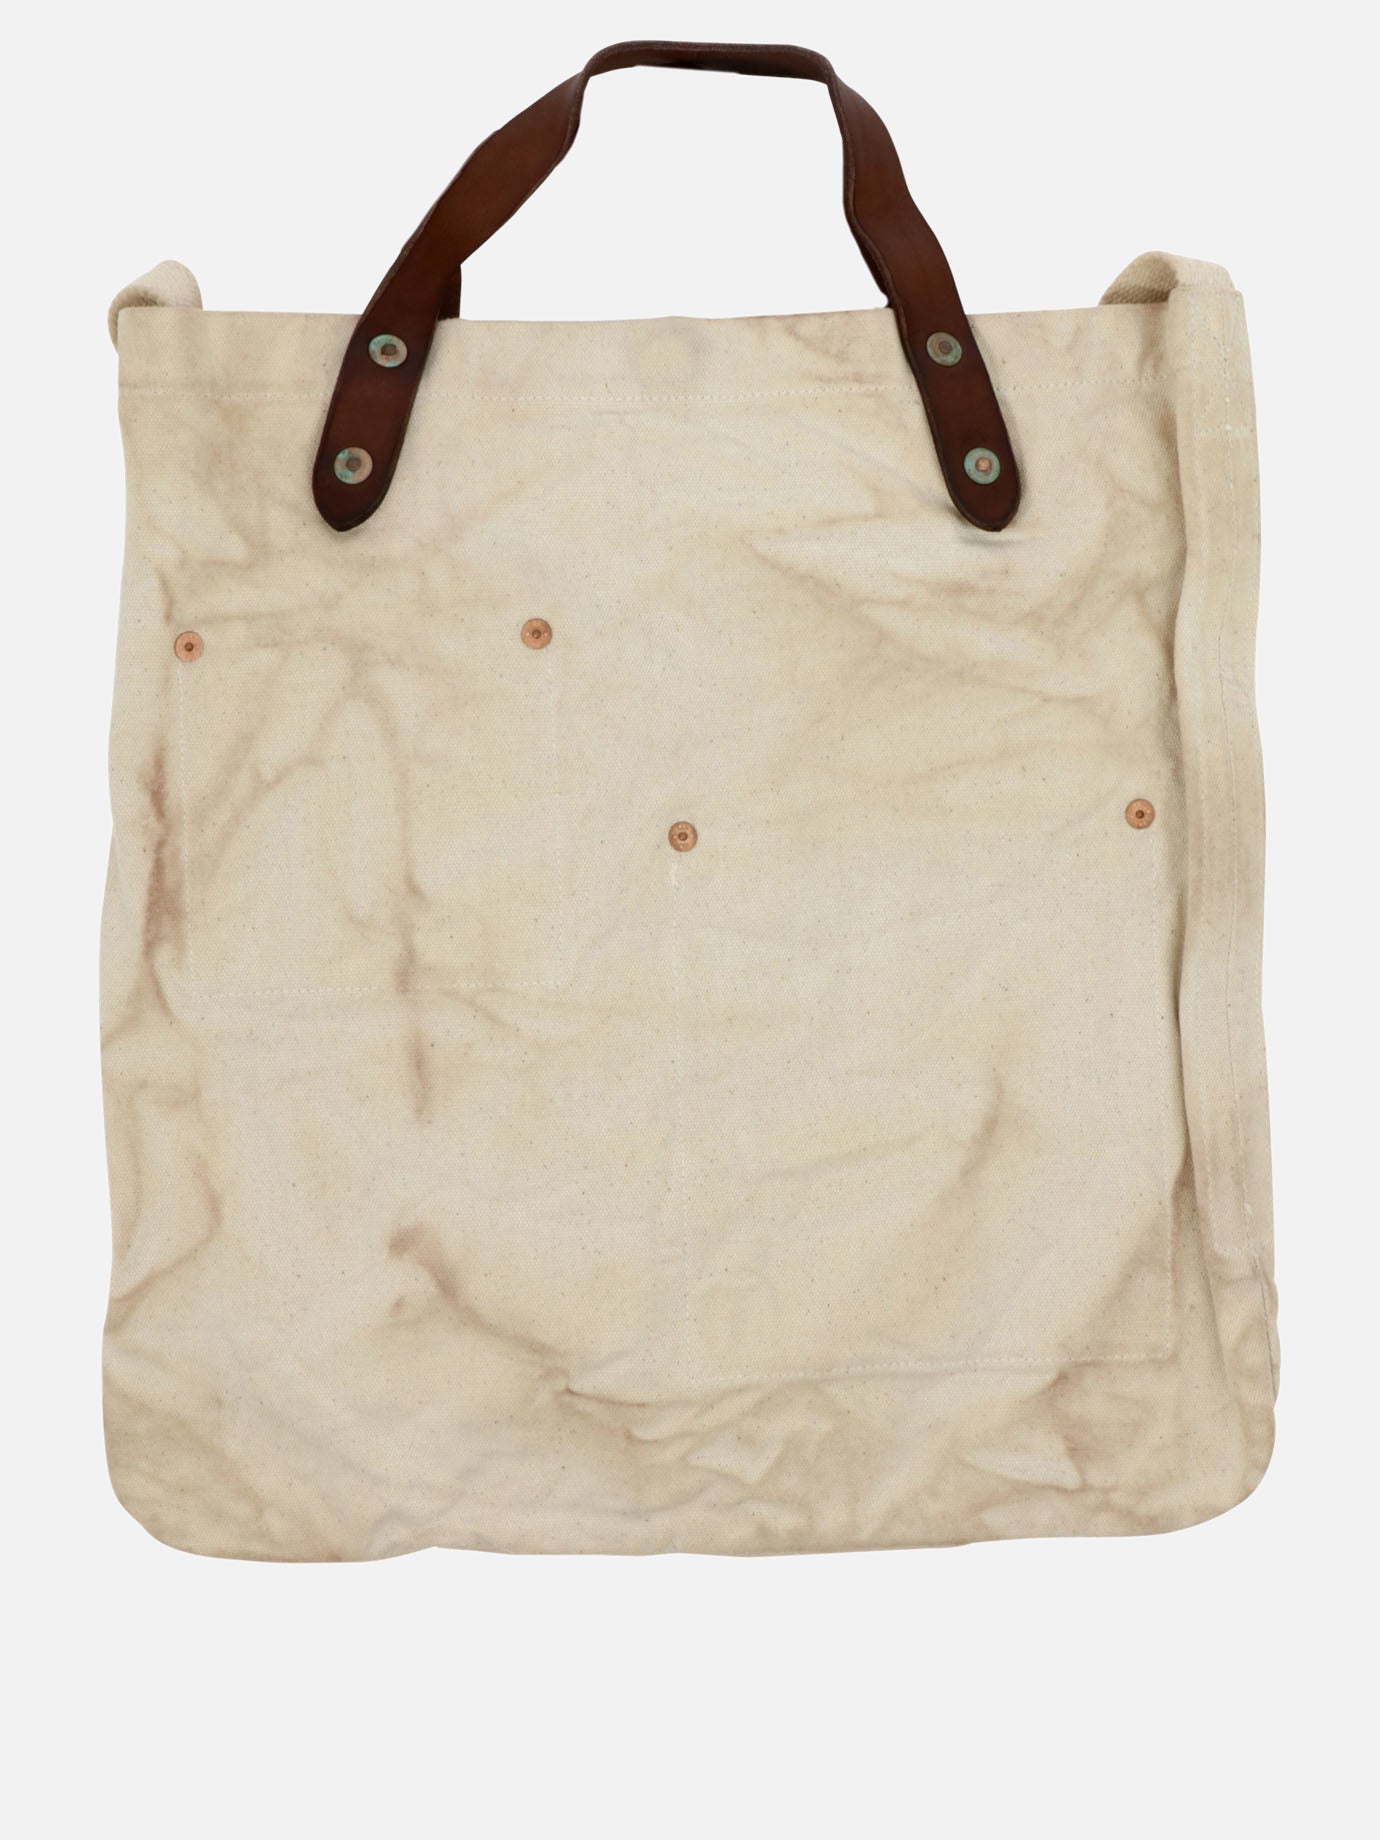 "RRL" tote bag with logo